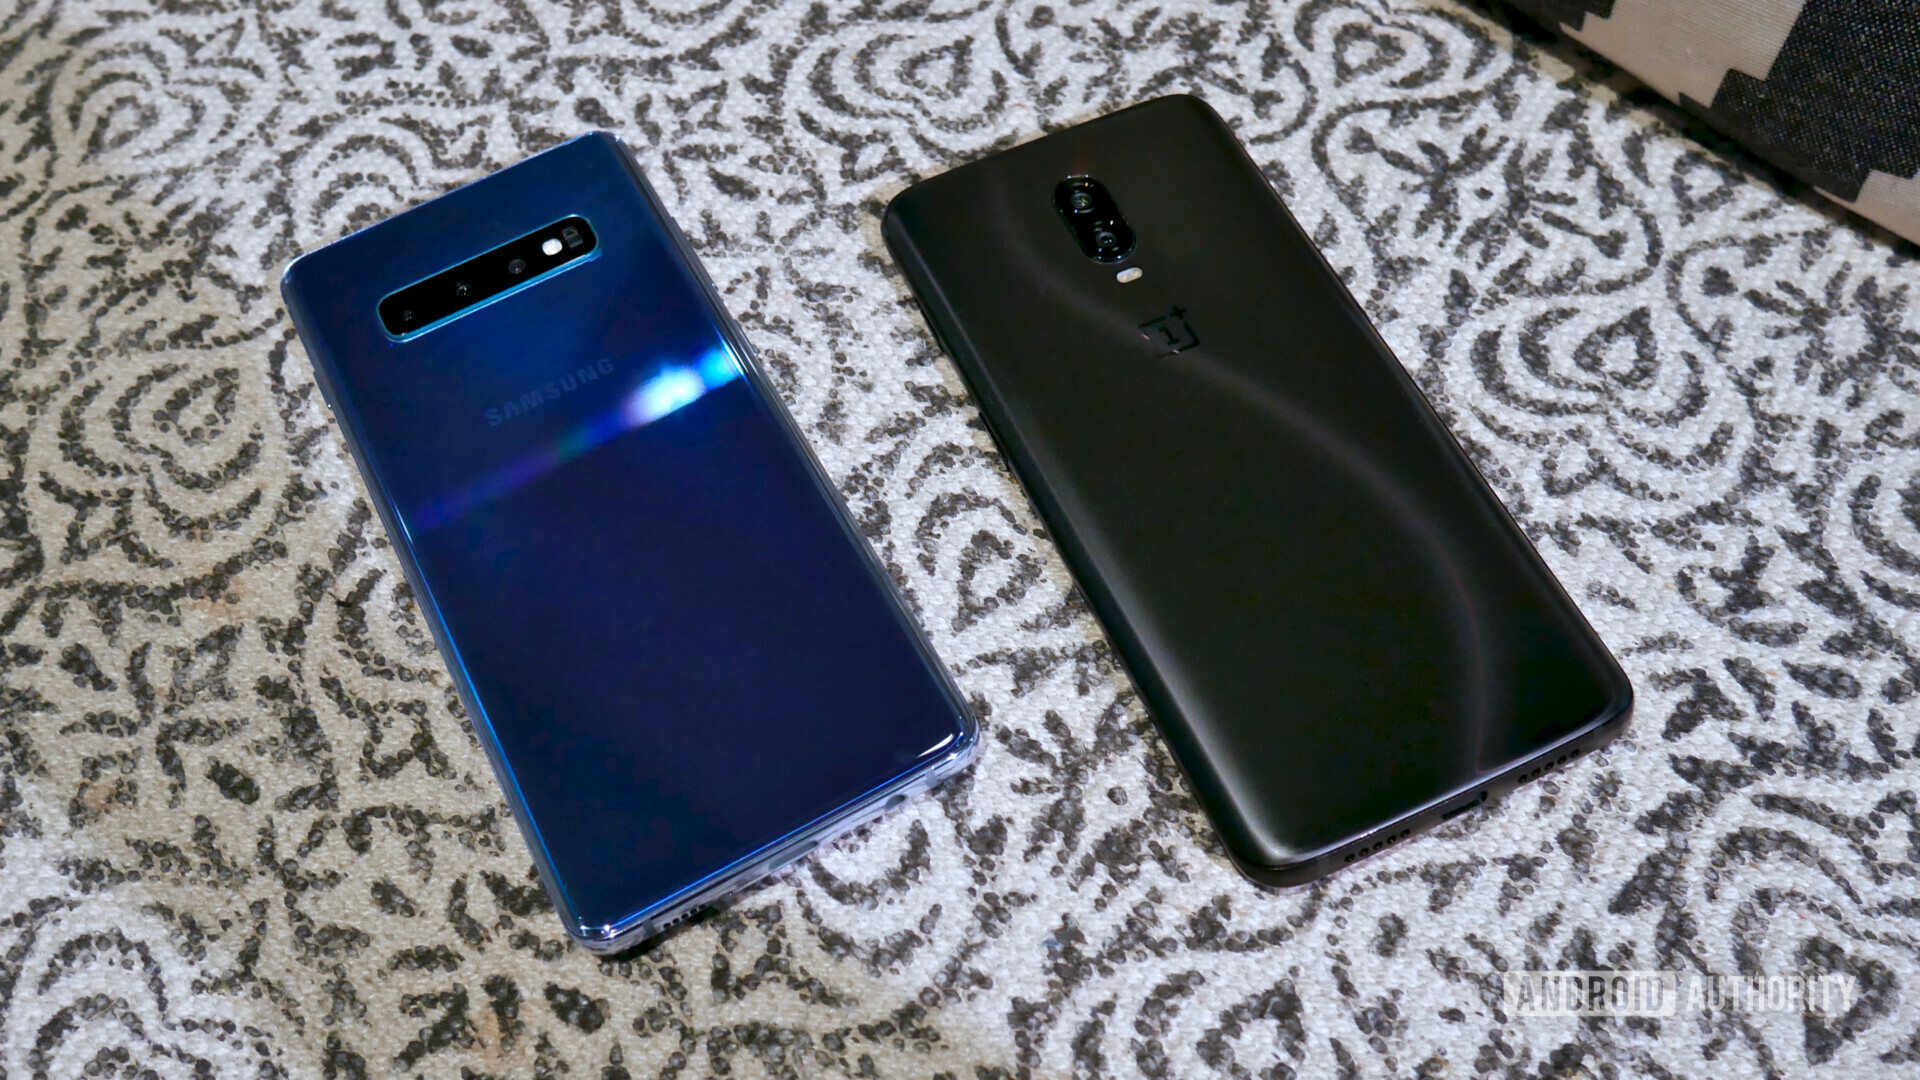 Backside of the Samsung Galaxy S10 next to an OnePlus 6T laid on a table.